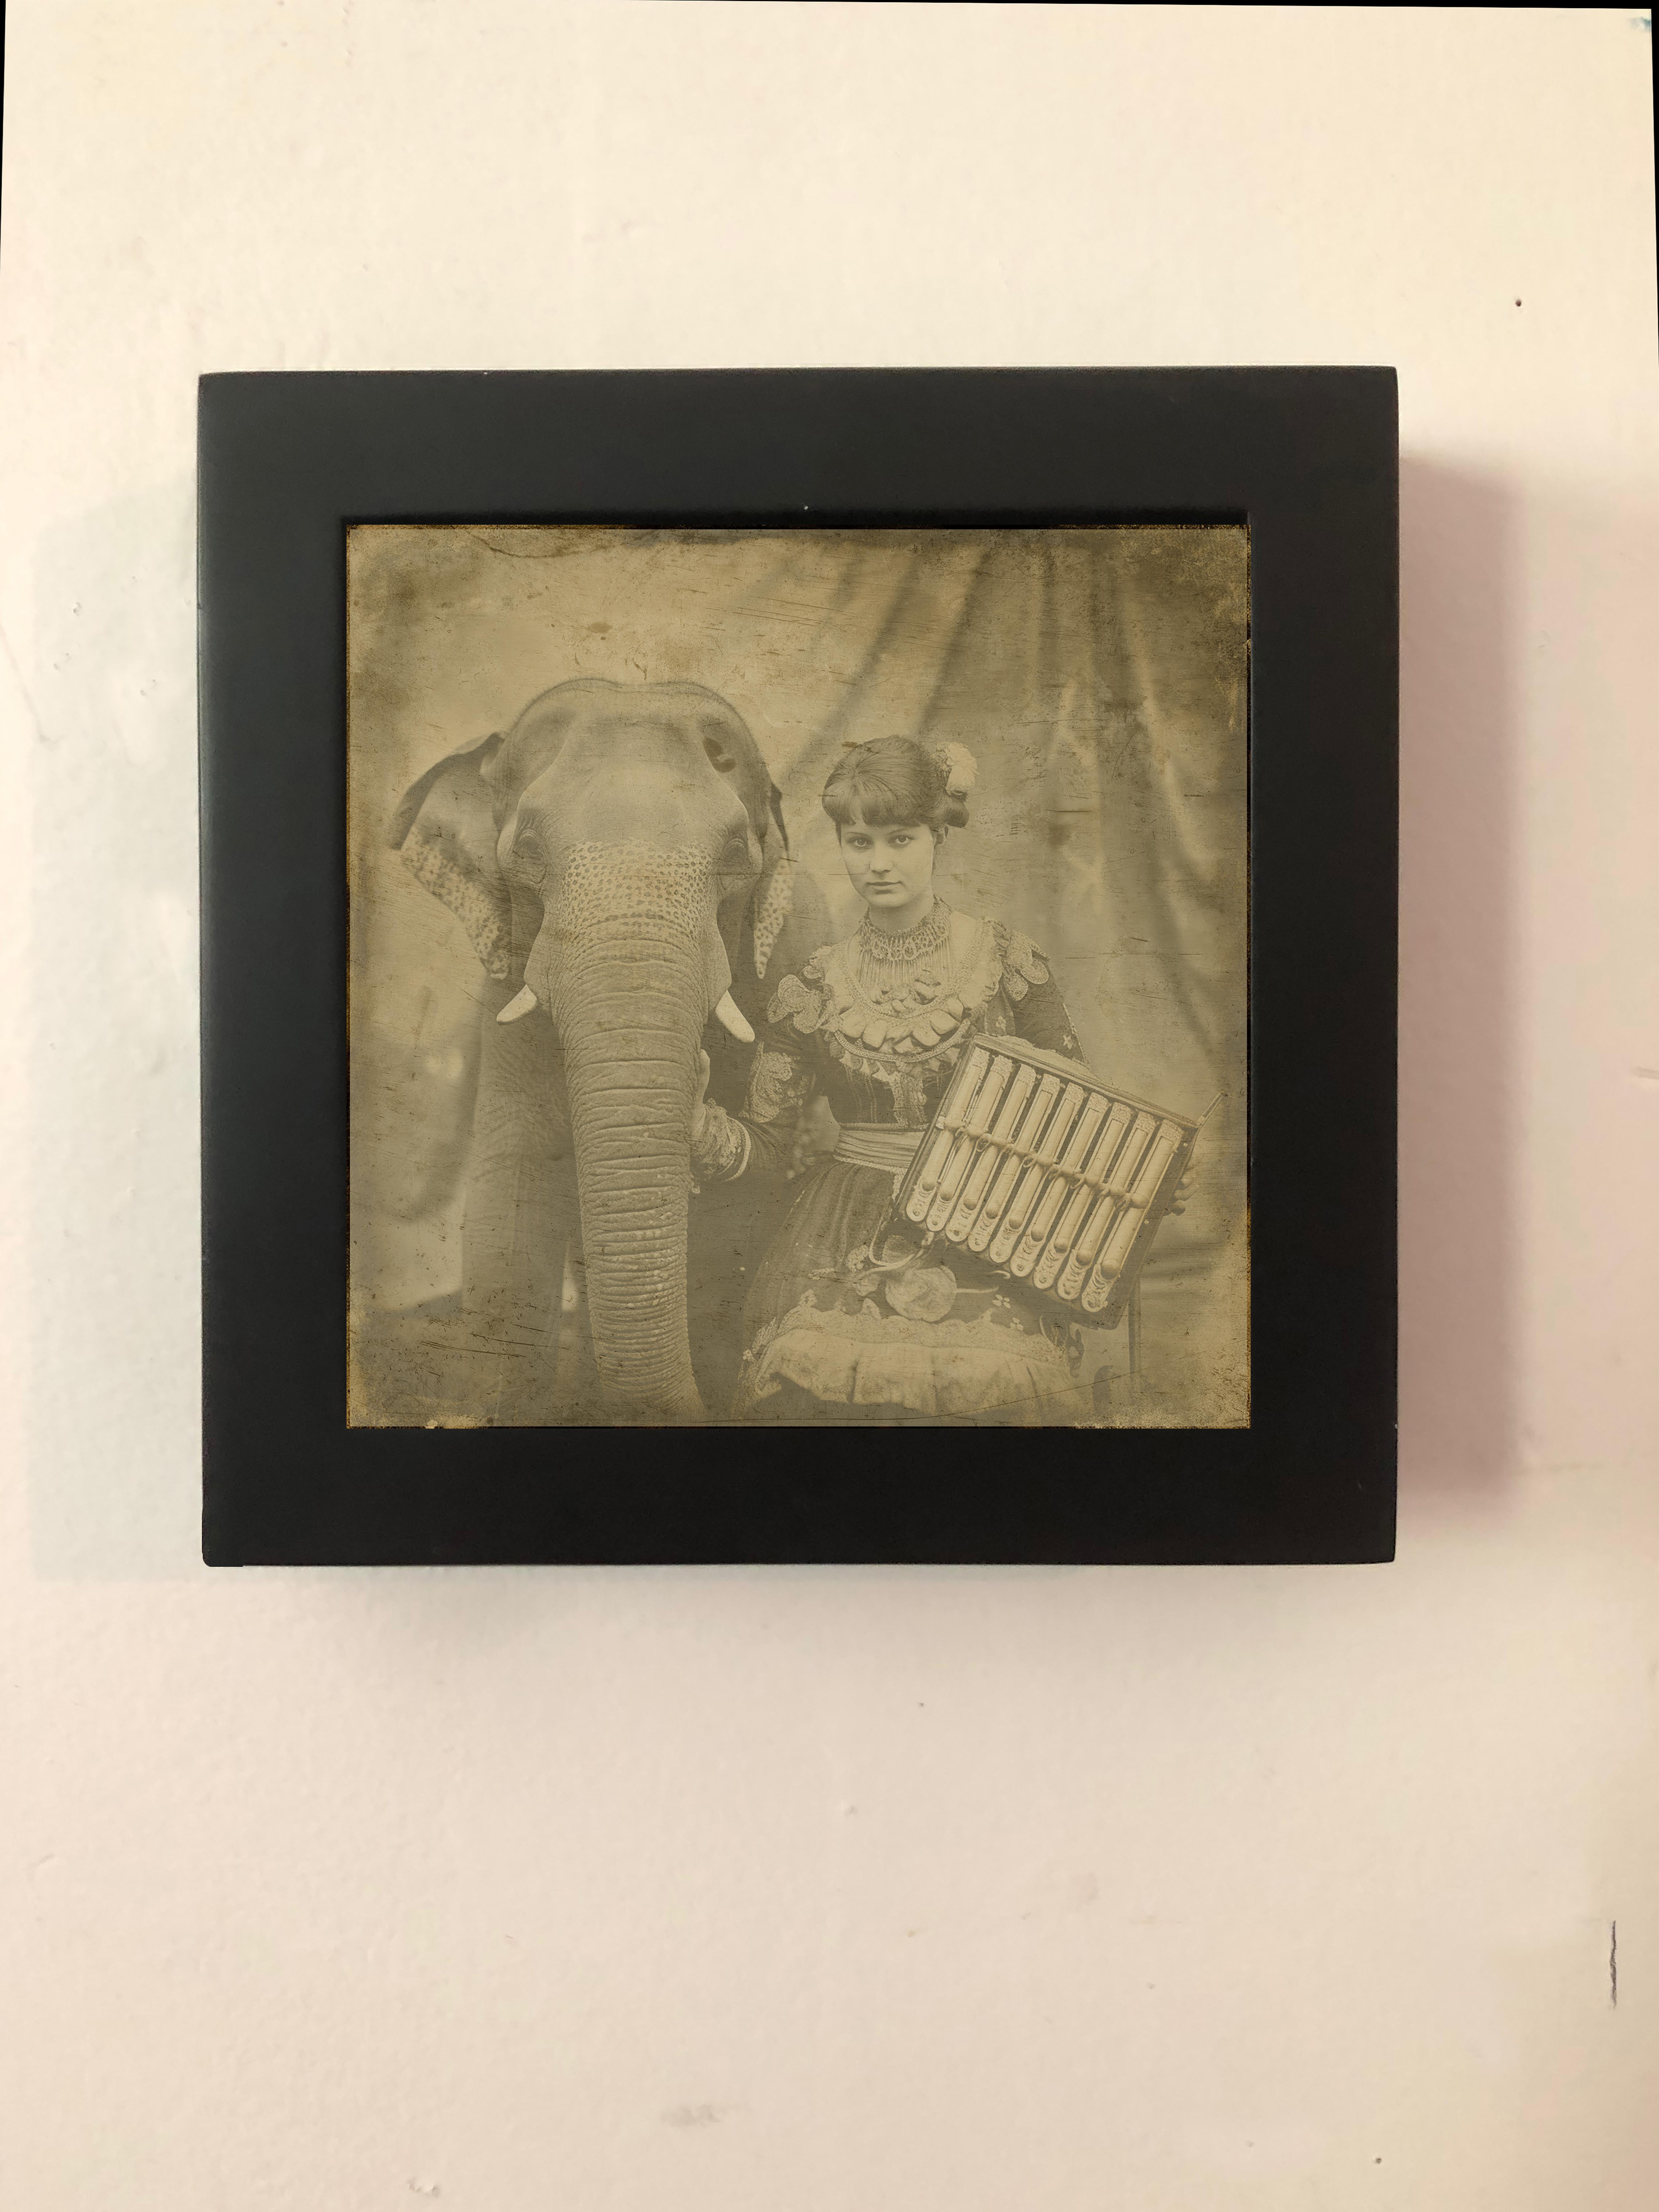 Eliese and her talking elephant =xotic daguerreotype reproduction Framed - Photograph by FPA Francis Pavy Artist